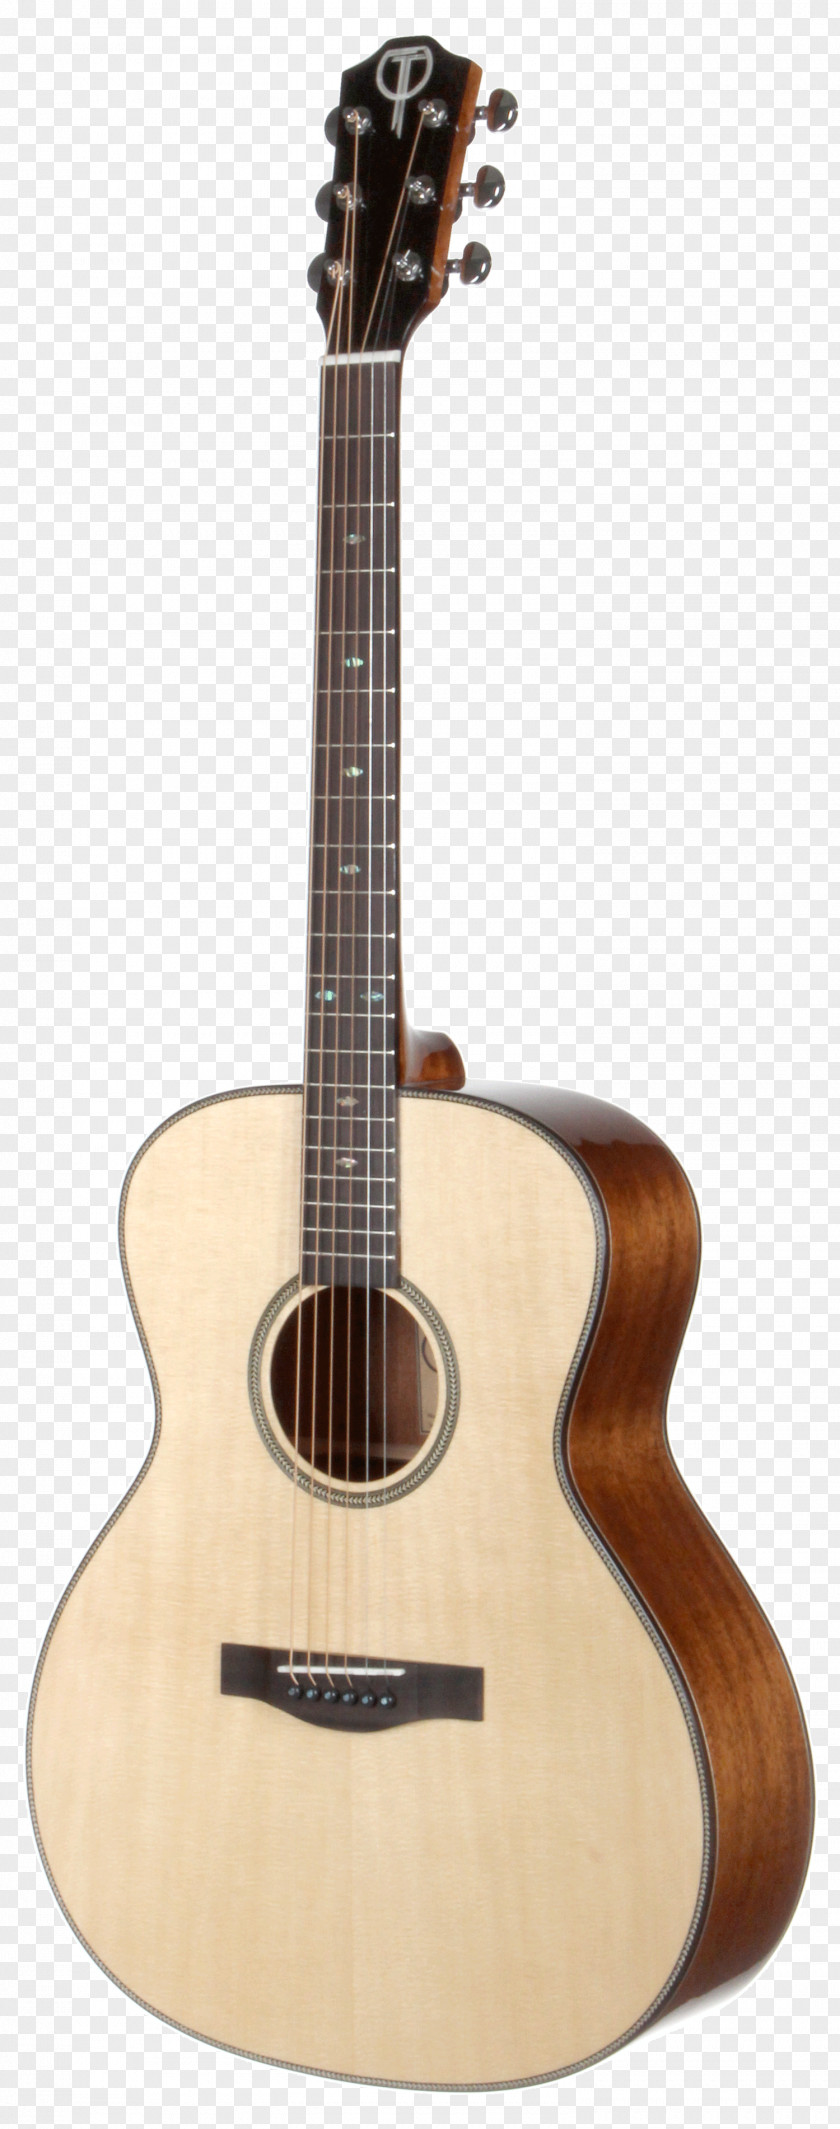 Guitar Steel-string Acoustic Yamaha Corporation C40 PNG